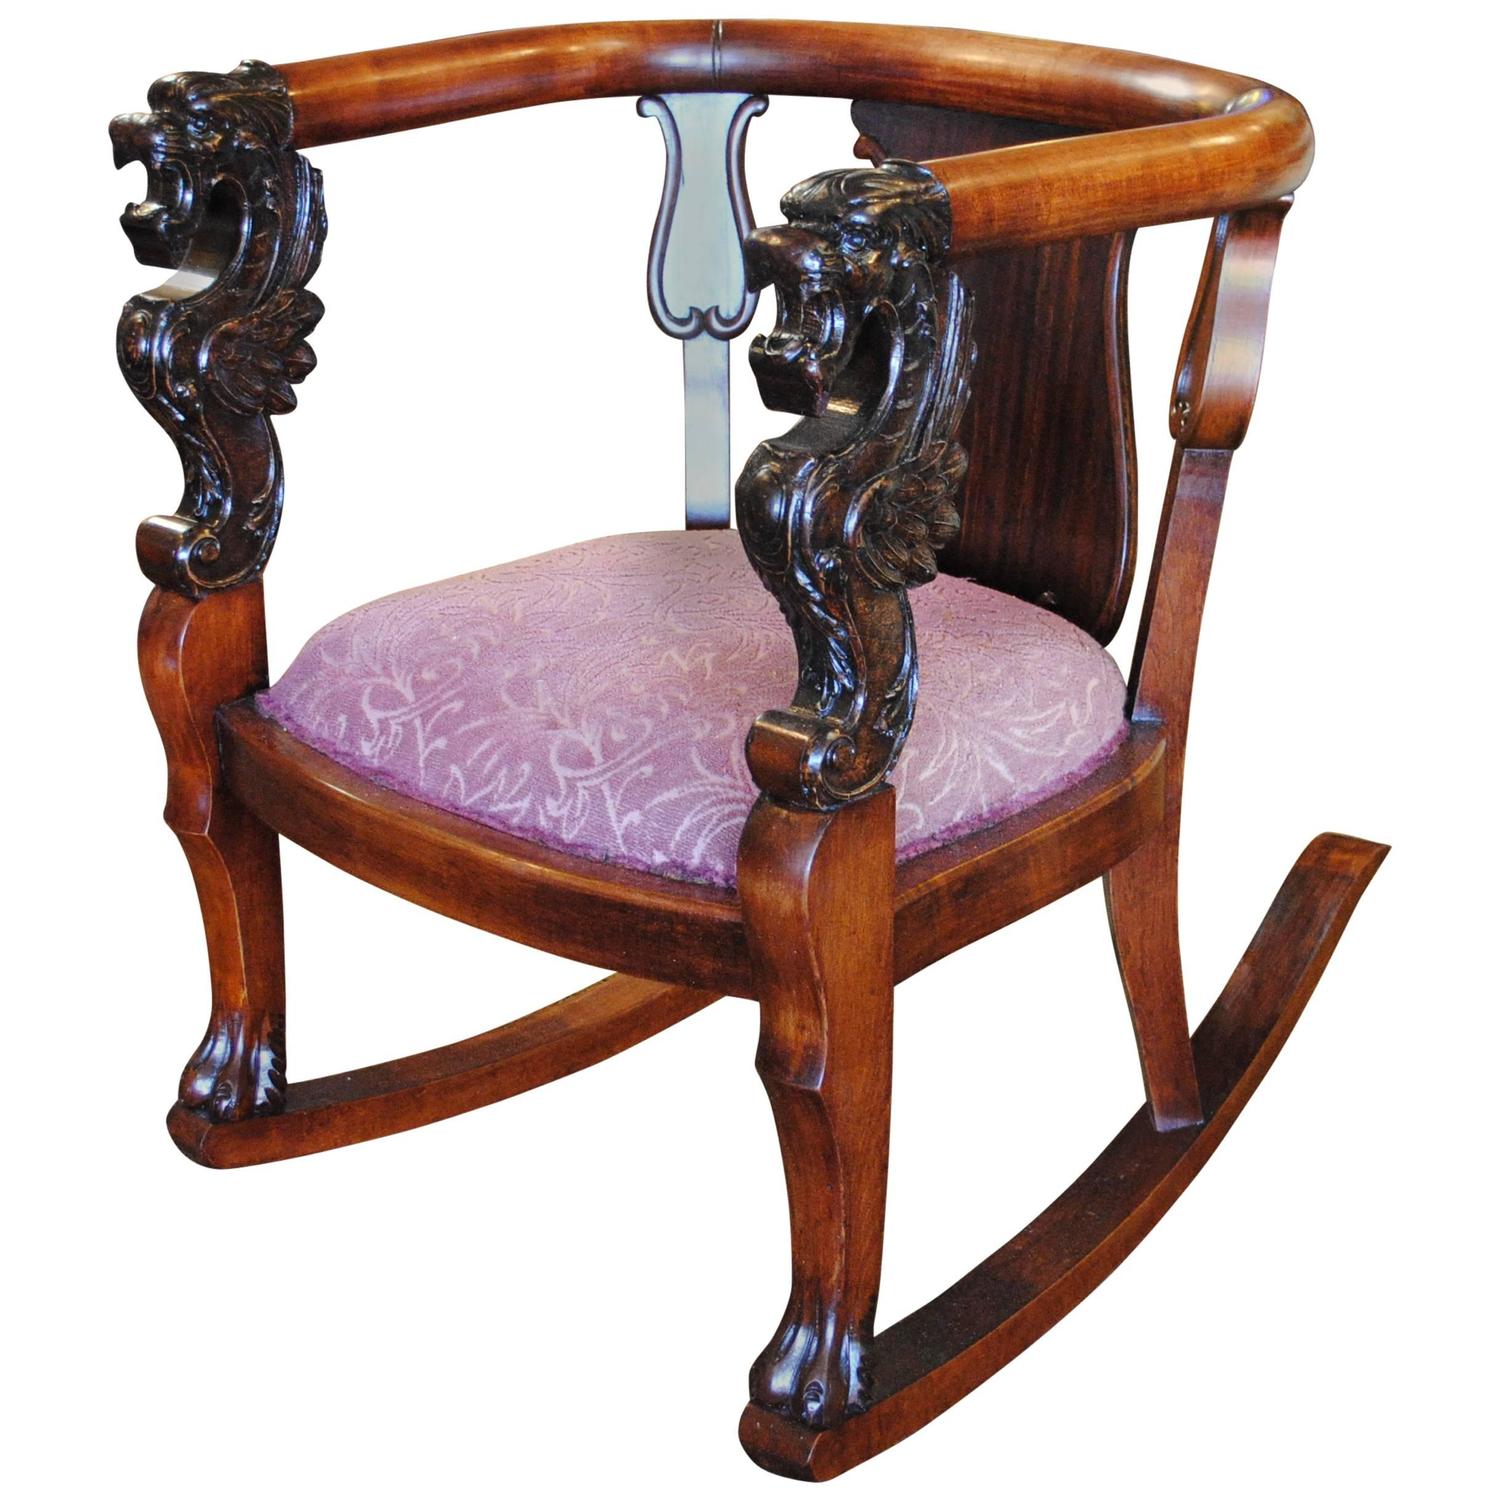 Antique Wood Rocking Chair Carved Griffin Lion Dragon For Sale At